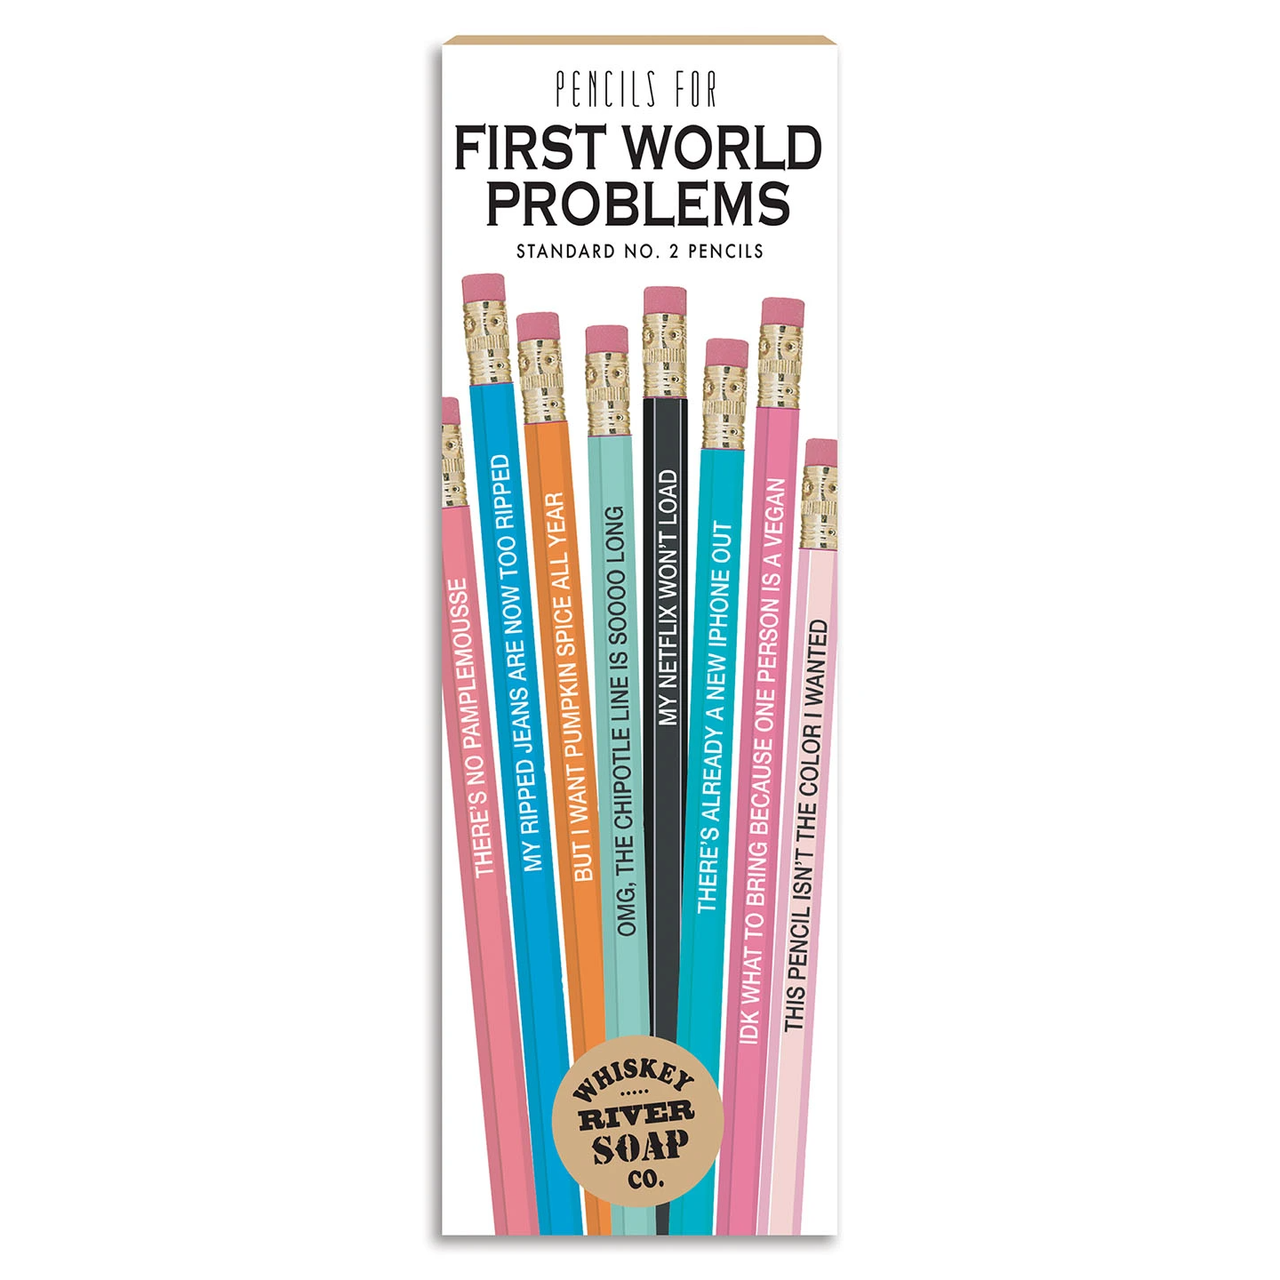 WHISKEY RIVER SOAP CO. FIRST WORLD PROBLEMS PENCILS